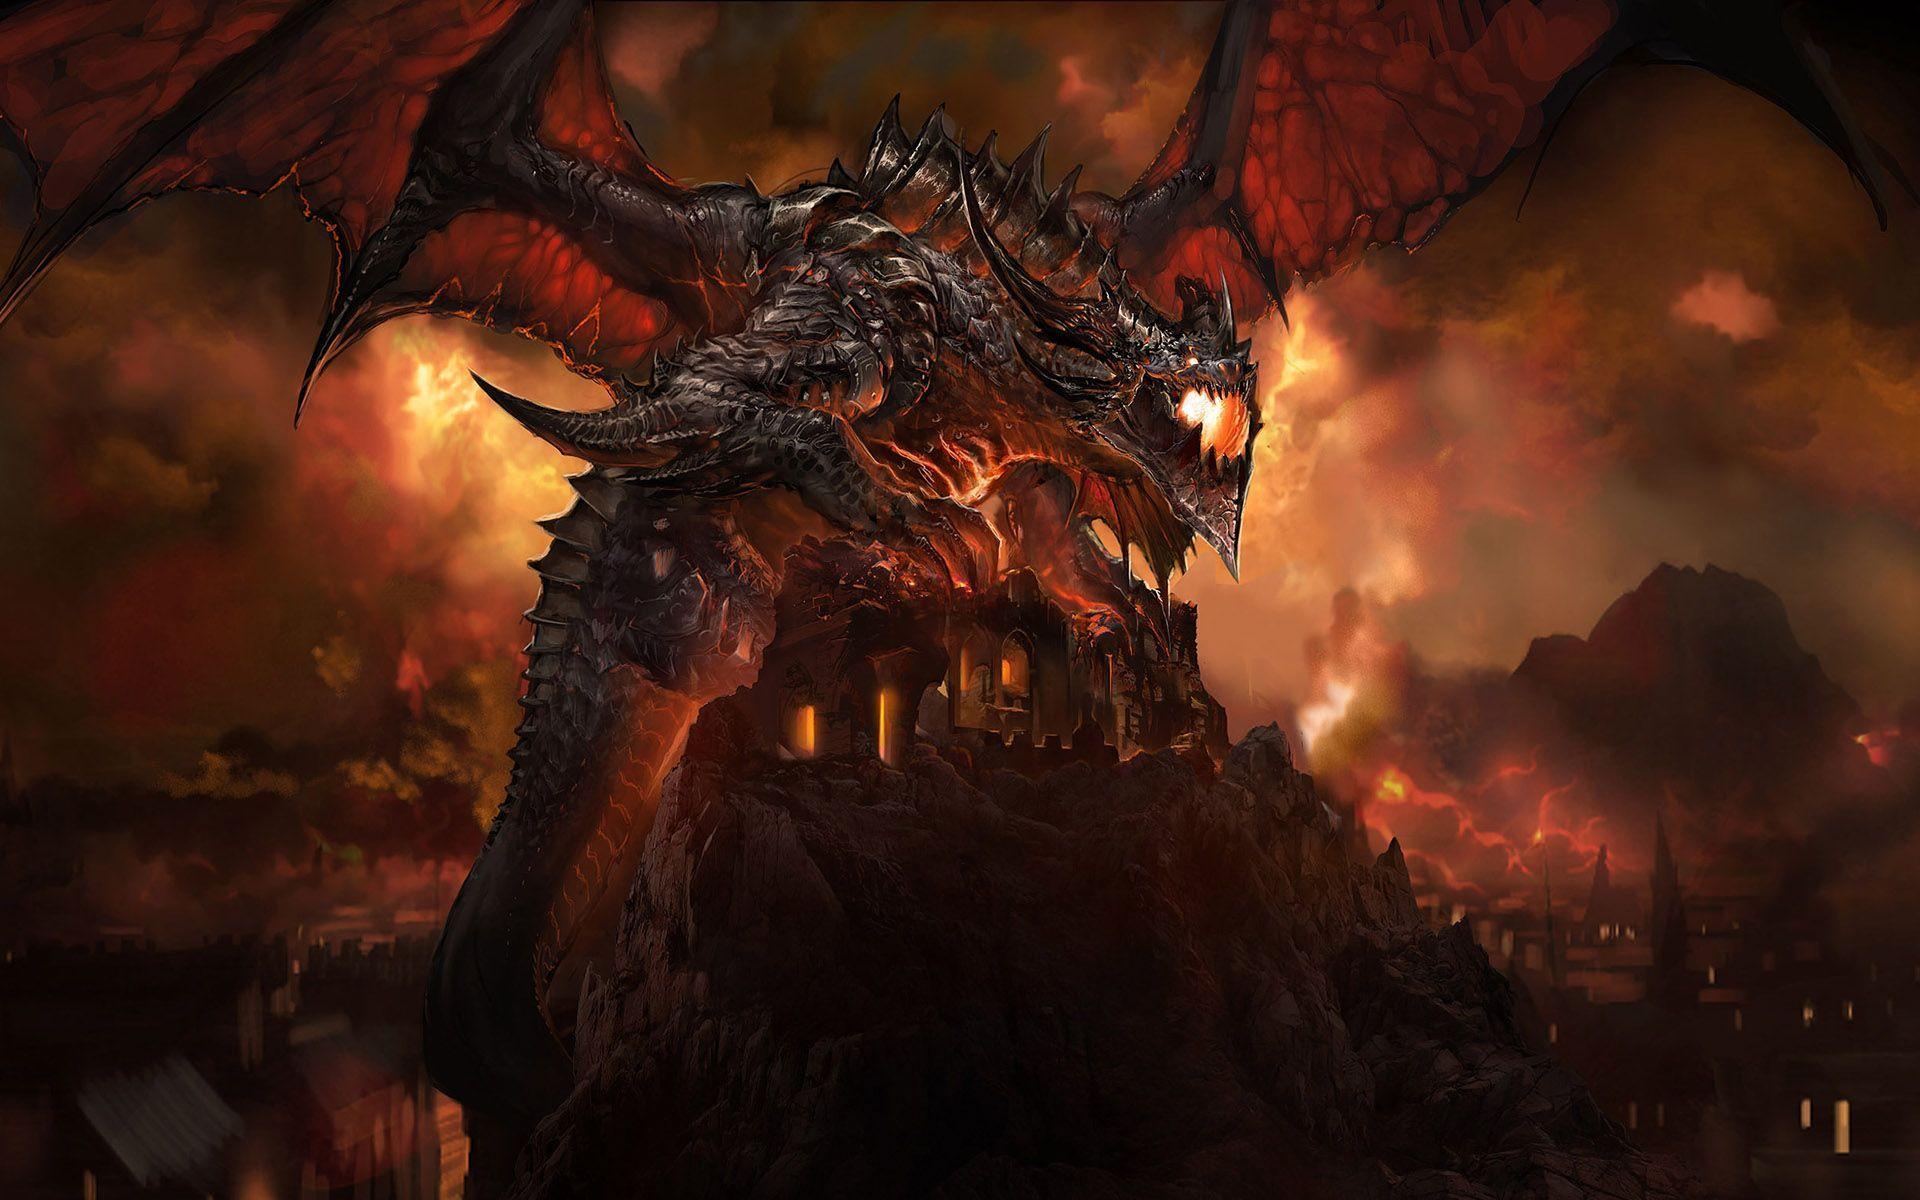 Best Epic Dragon Art Picture Gallery. Dragons, Legendary